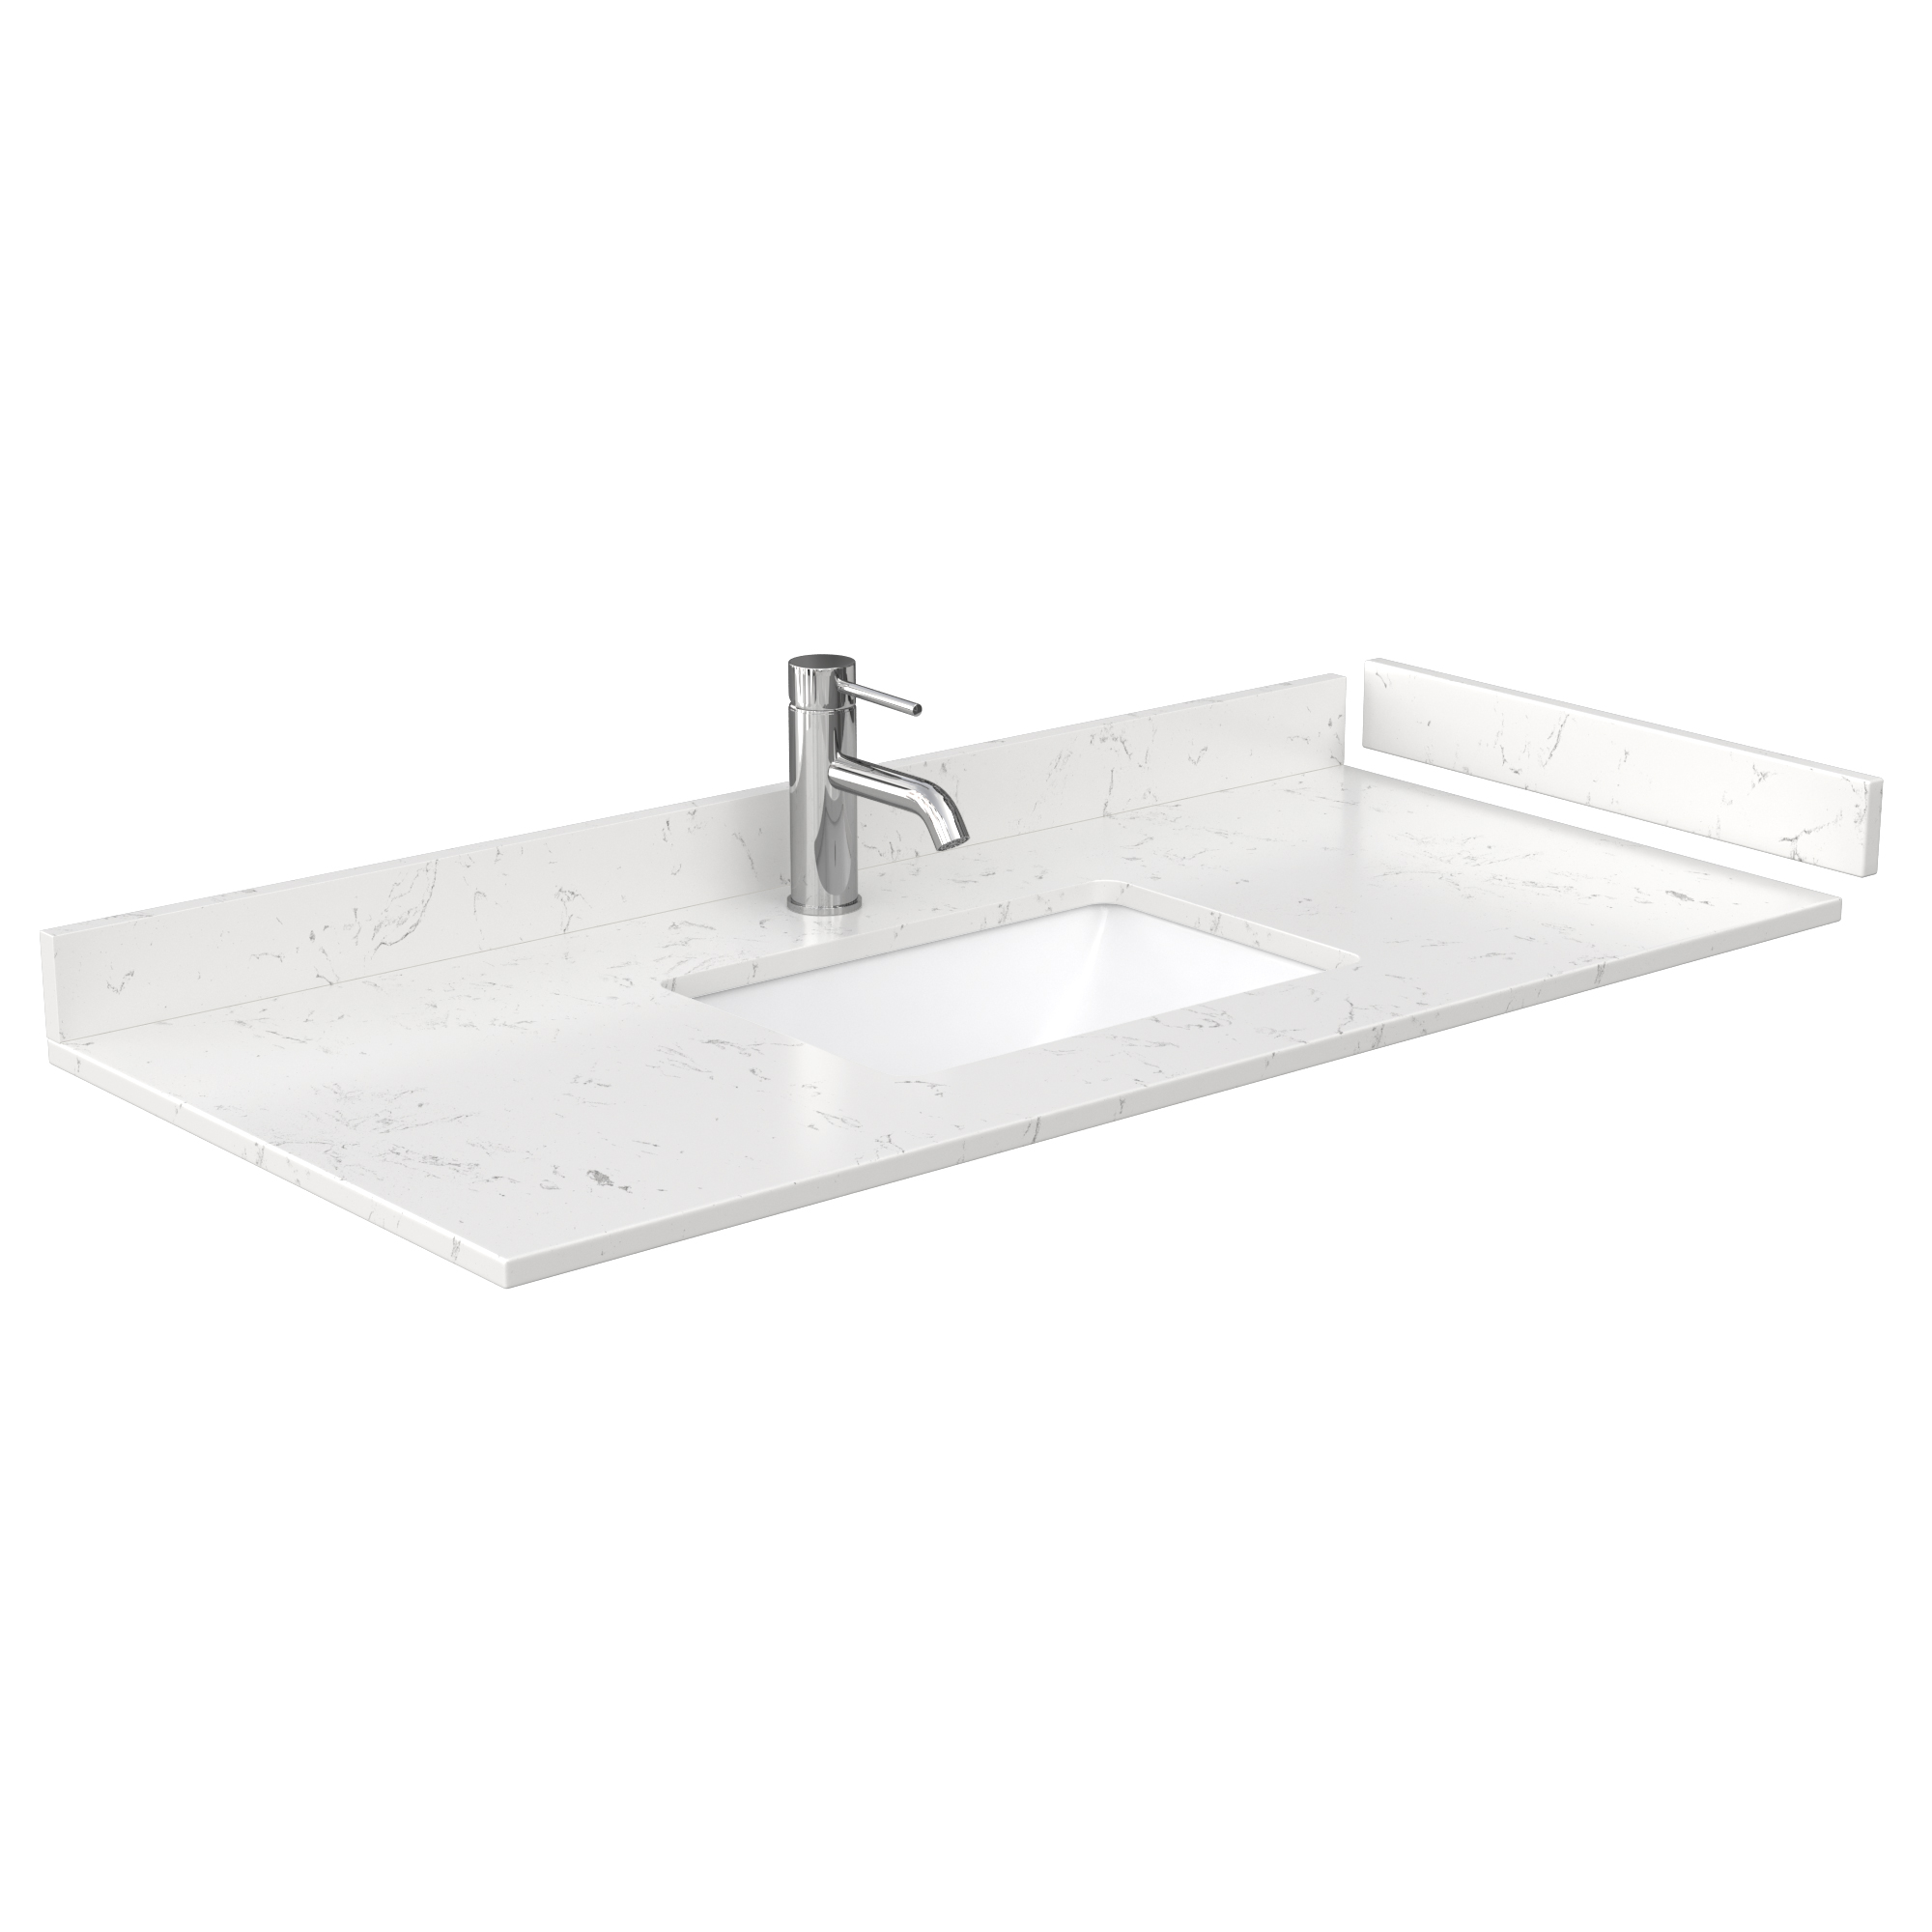 sheffield 48" single bathroom vanity by wyndham collection - white